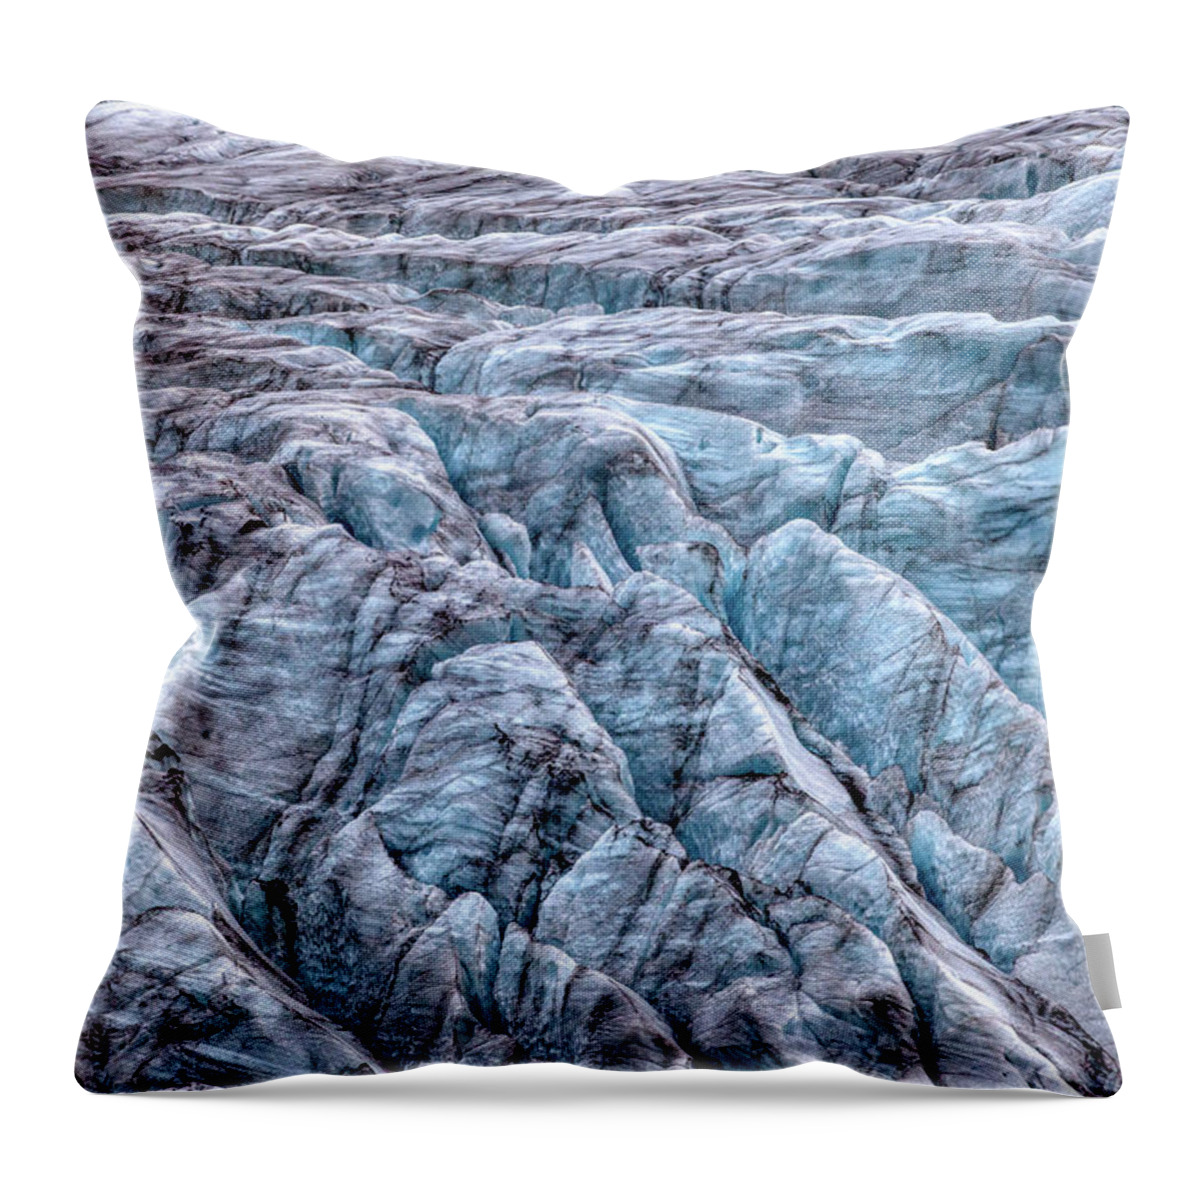 Drone Throw Pillow featuring the photograph Iceland Glacier by David Letts